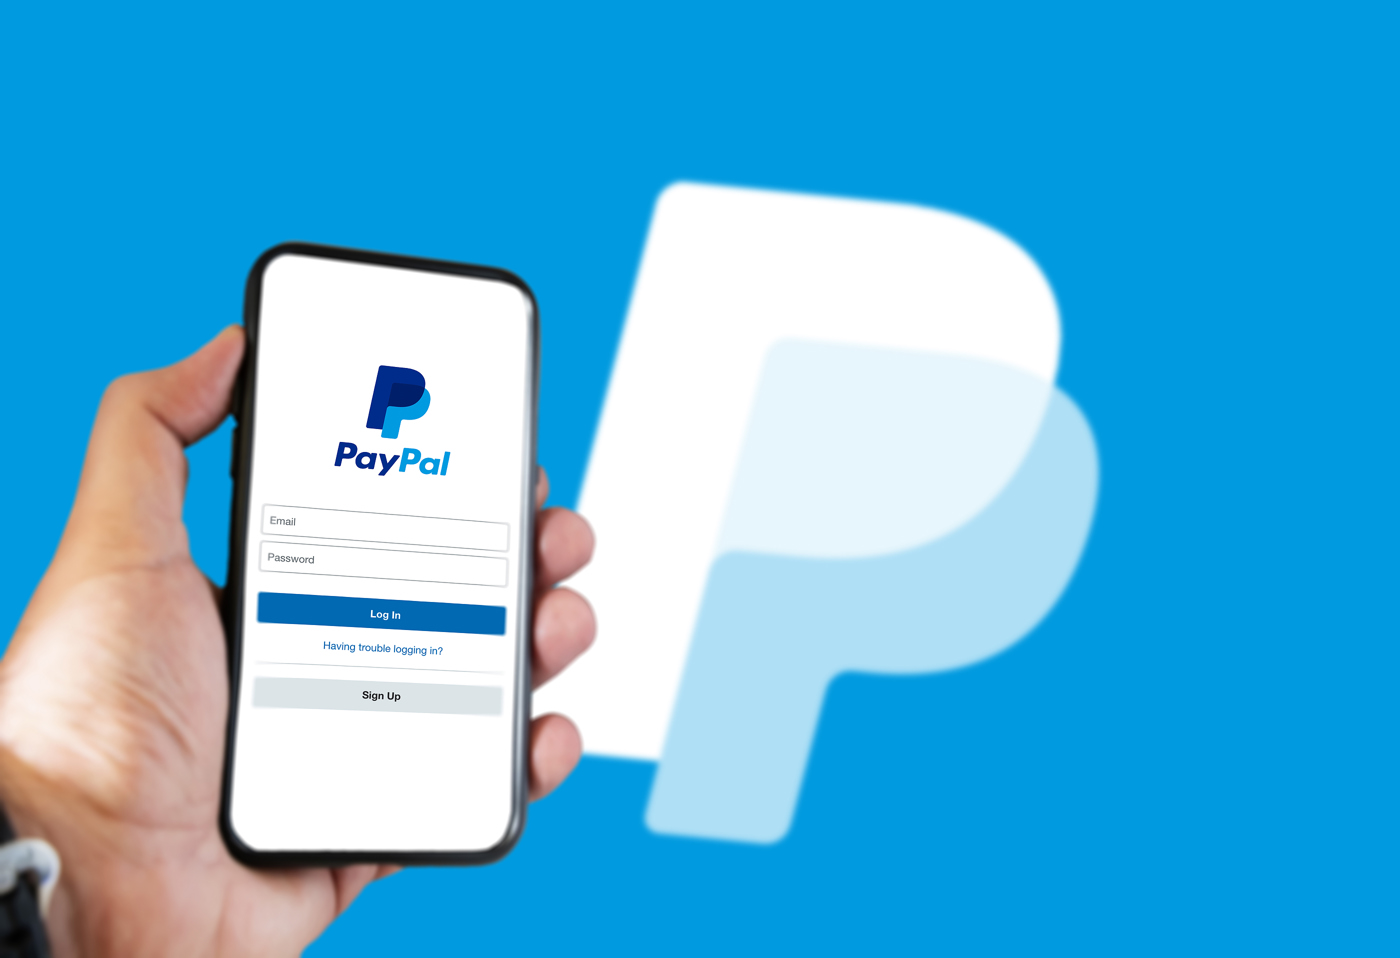 Paypal stock, PYPL stock, Paypal cryptocurrency